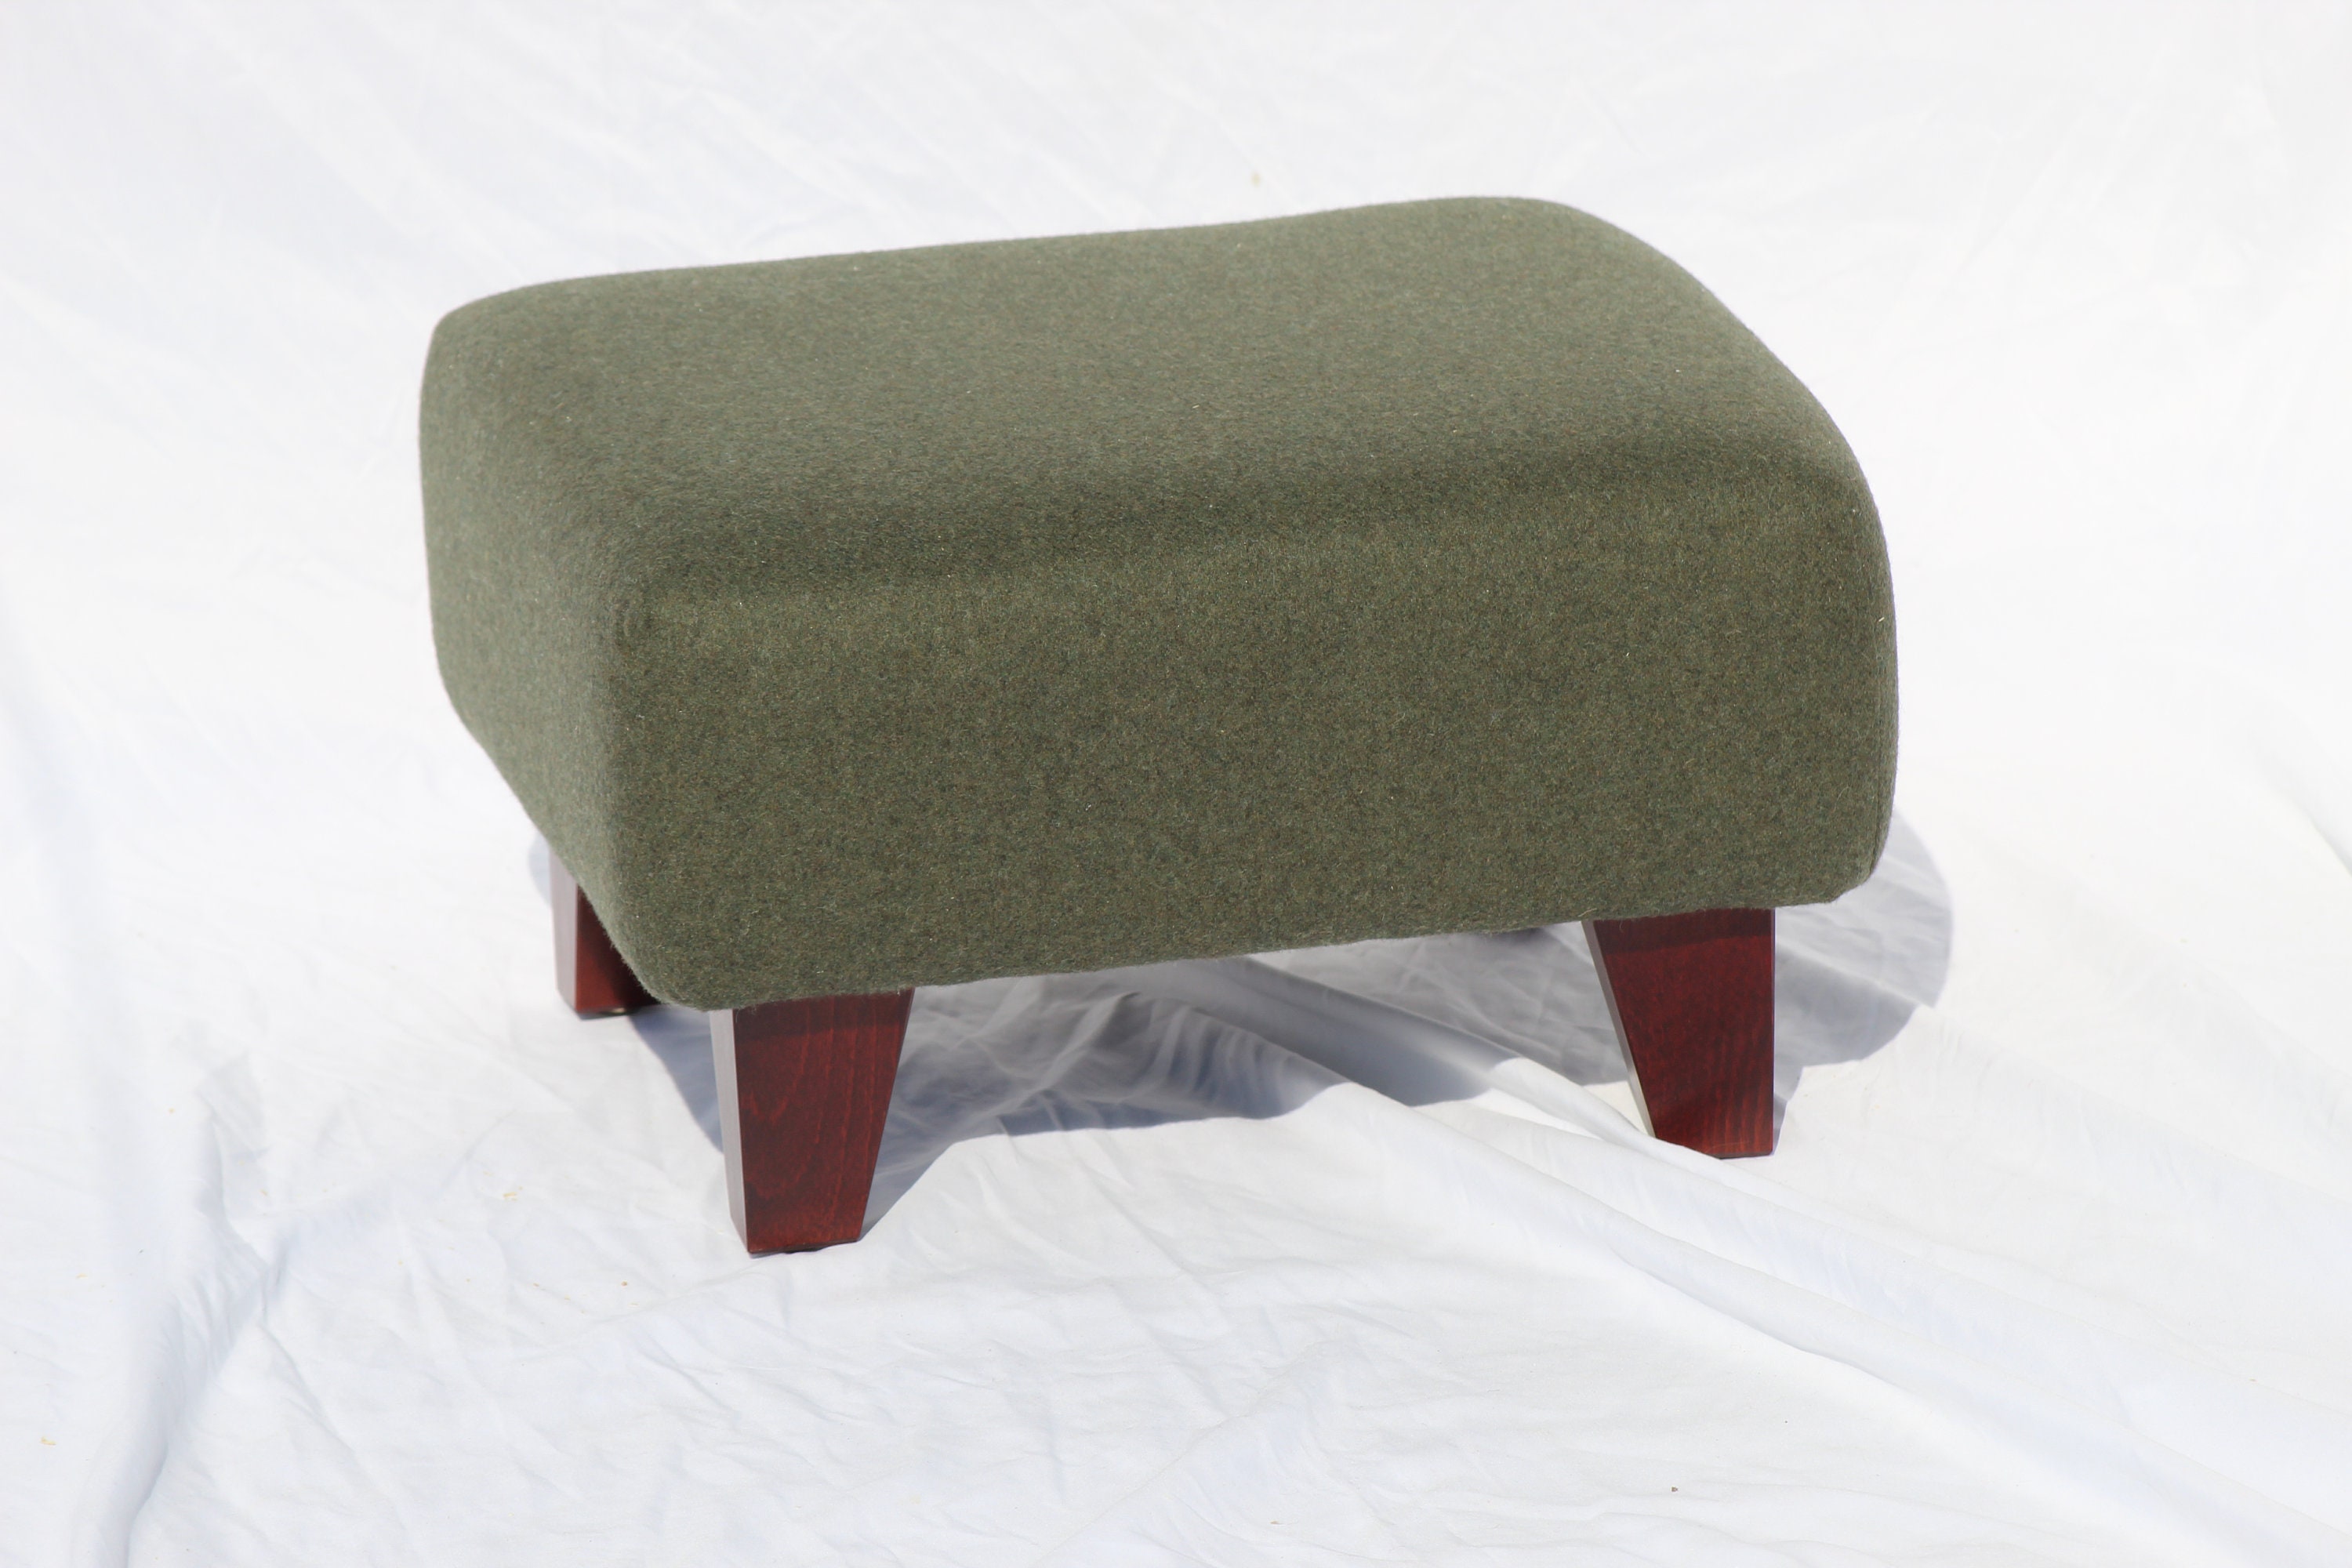 NEW Lime GREEN Plain 19-29 Cm Tall Small Foot Stool With Wooden